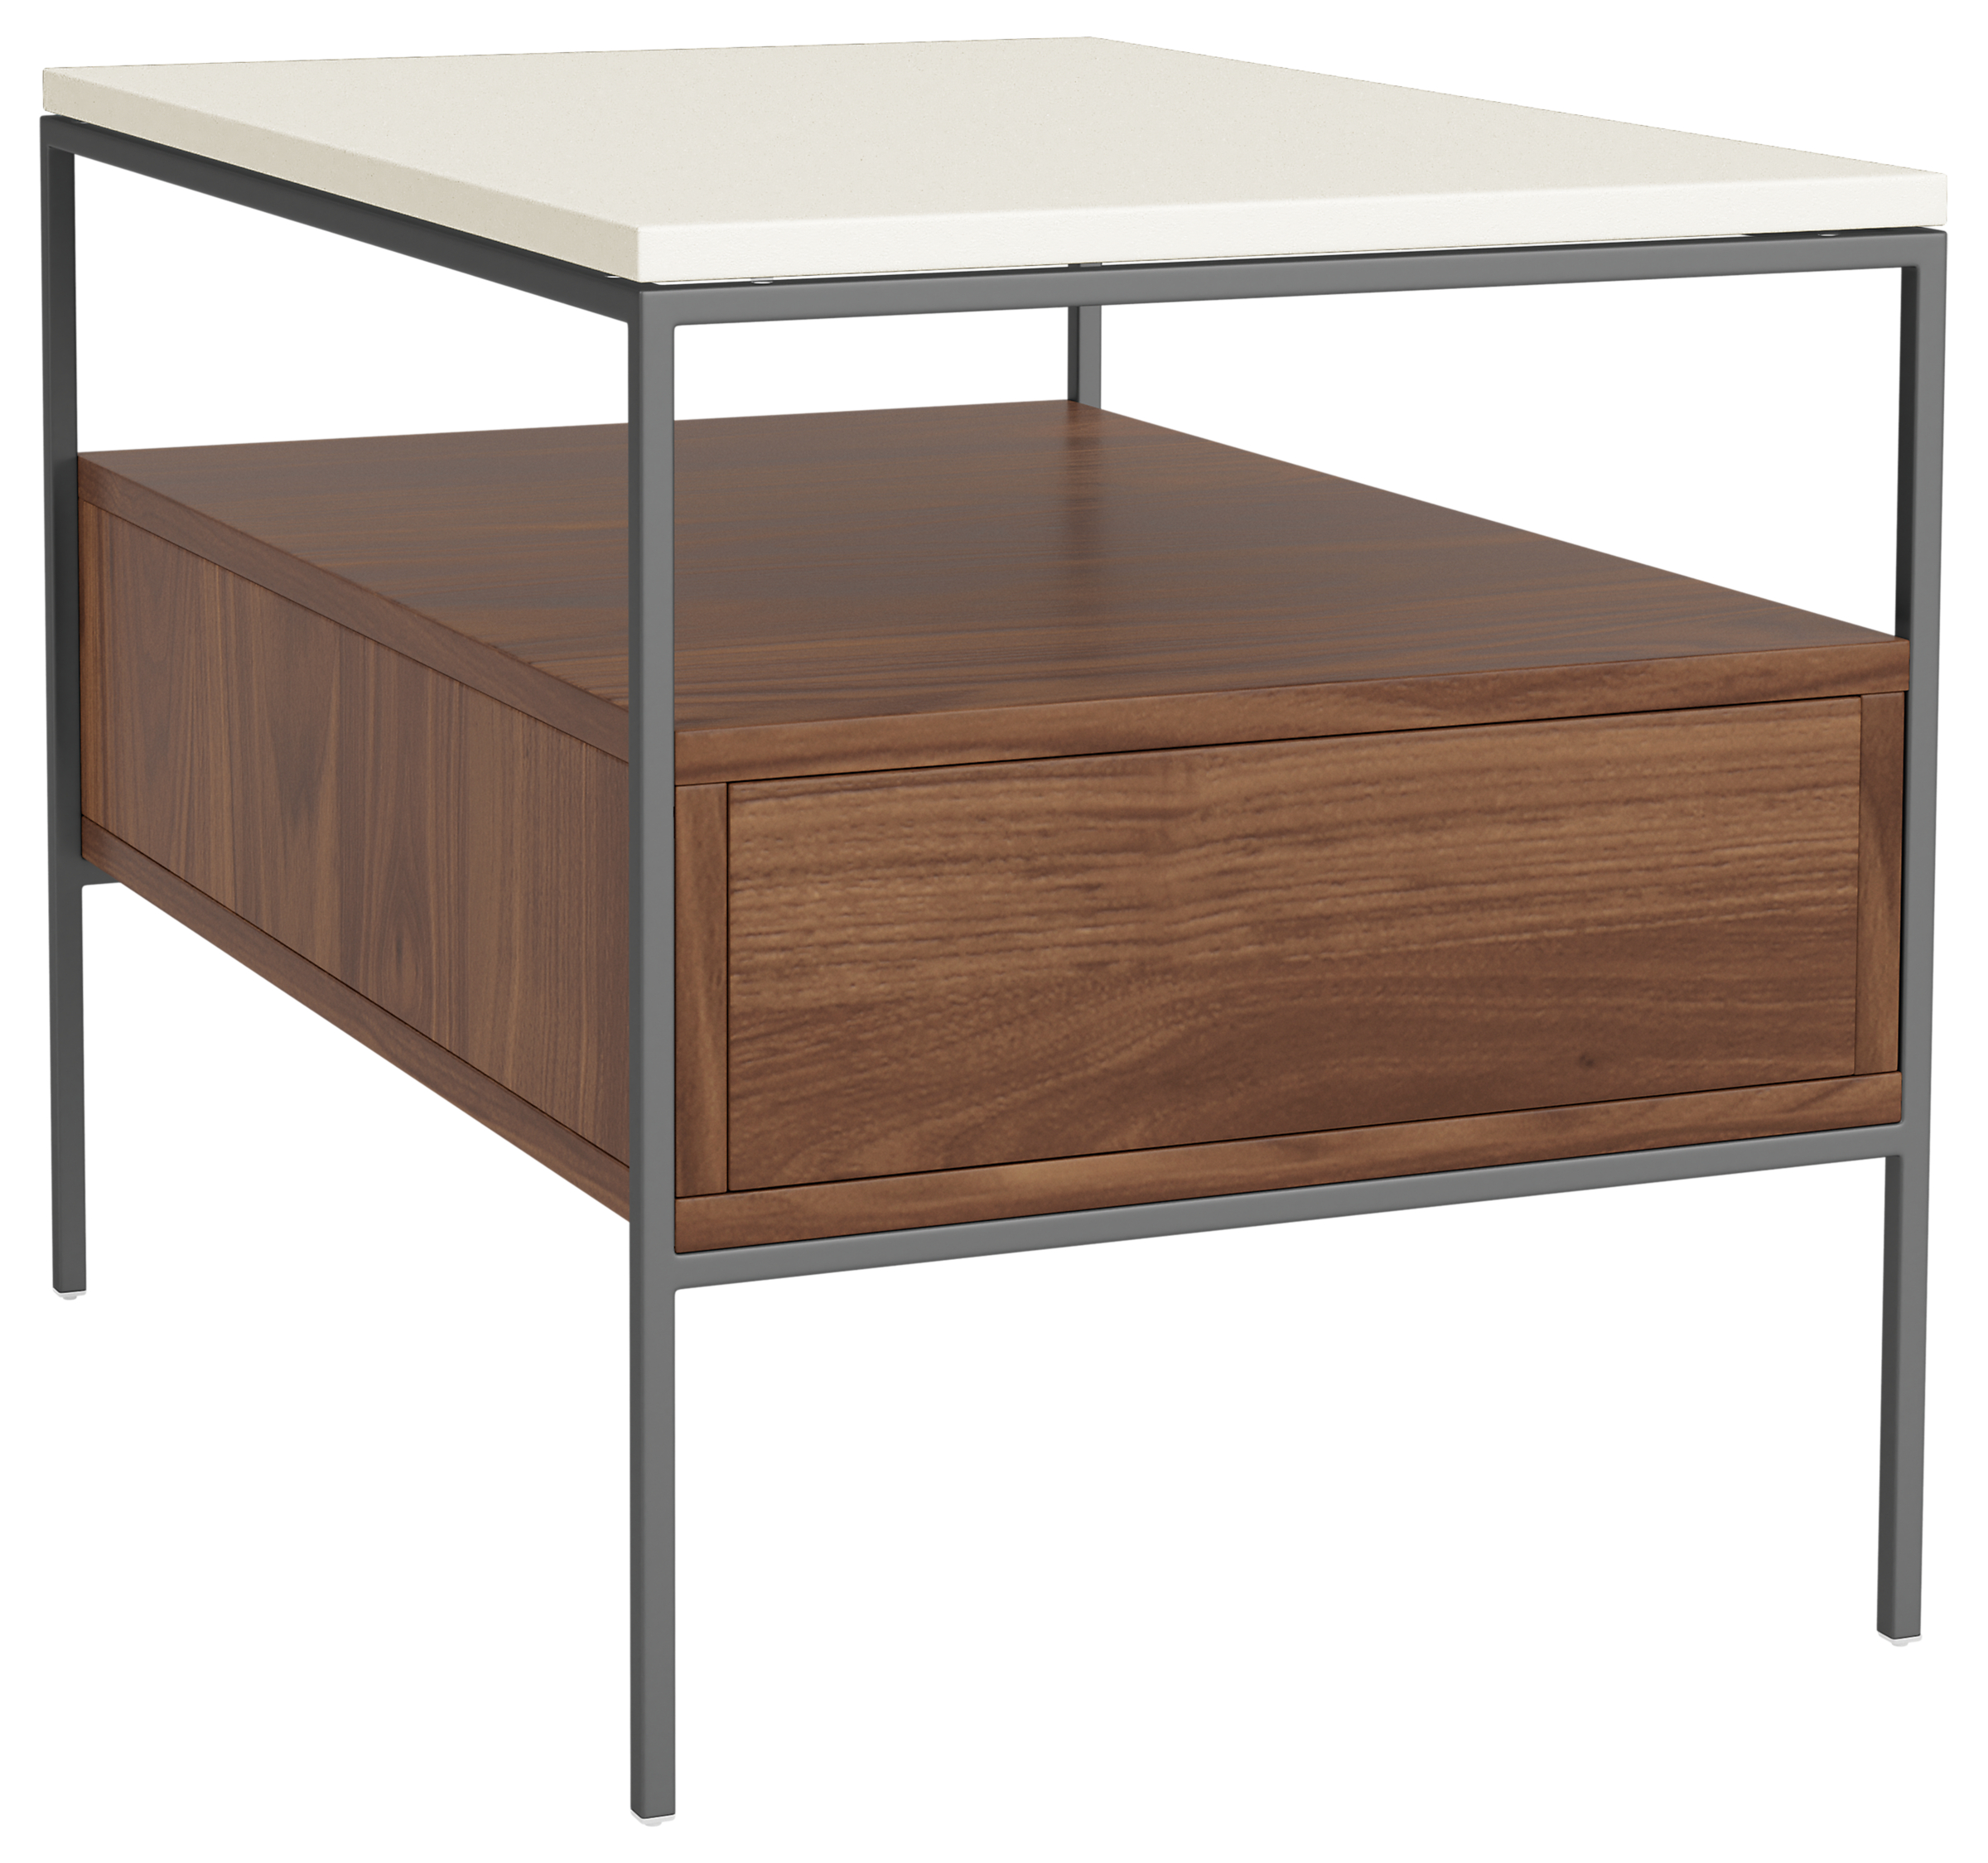 Williams 20w 30d 22h End Table